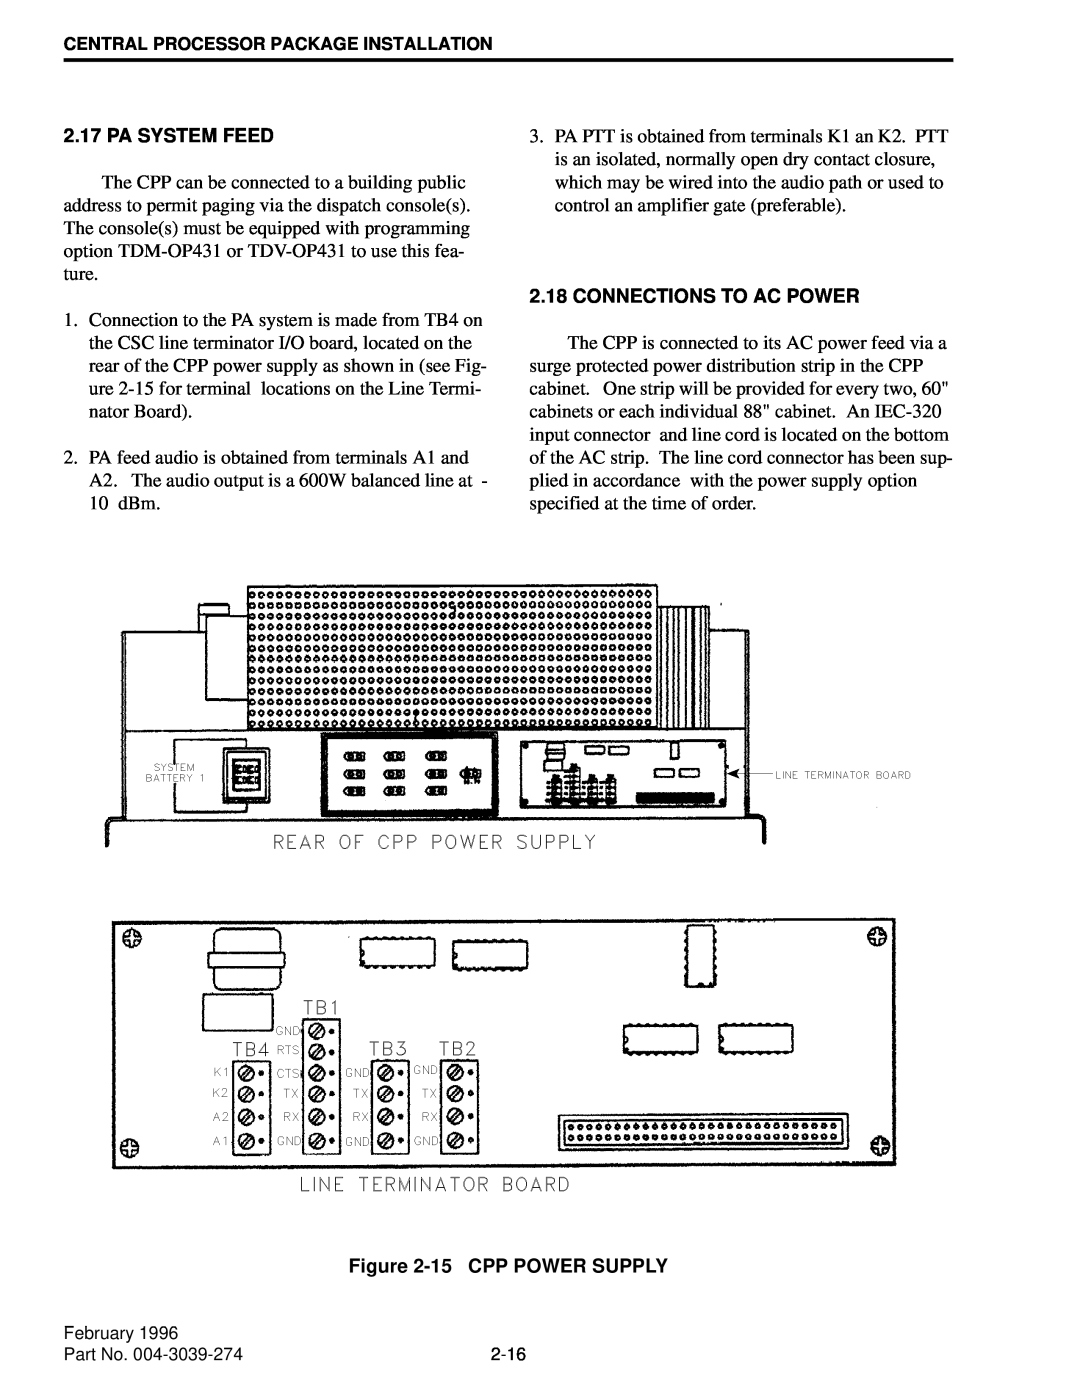 EFJohnson VR-CM50 manual Pa System Feed, 2.18CONNECTIONS TO AC POWER, 15CPP POWER SUPPLY, February, 2-16 